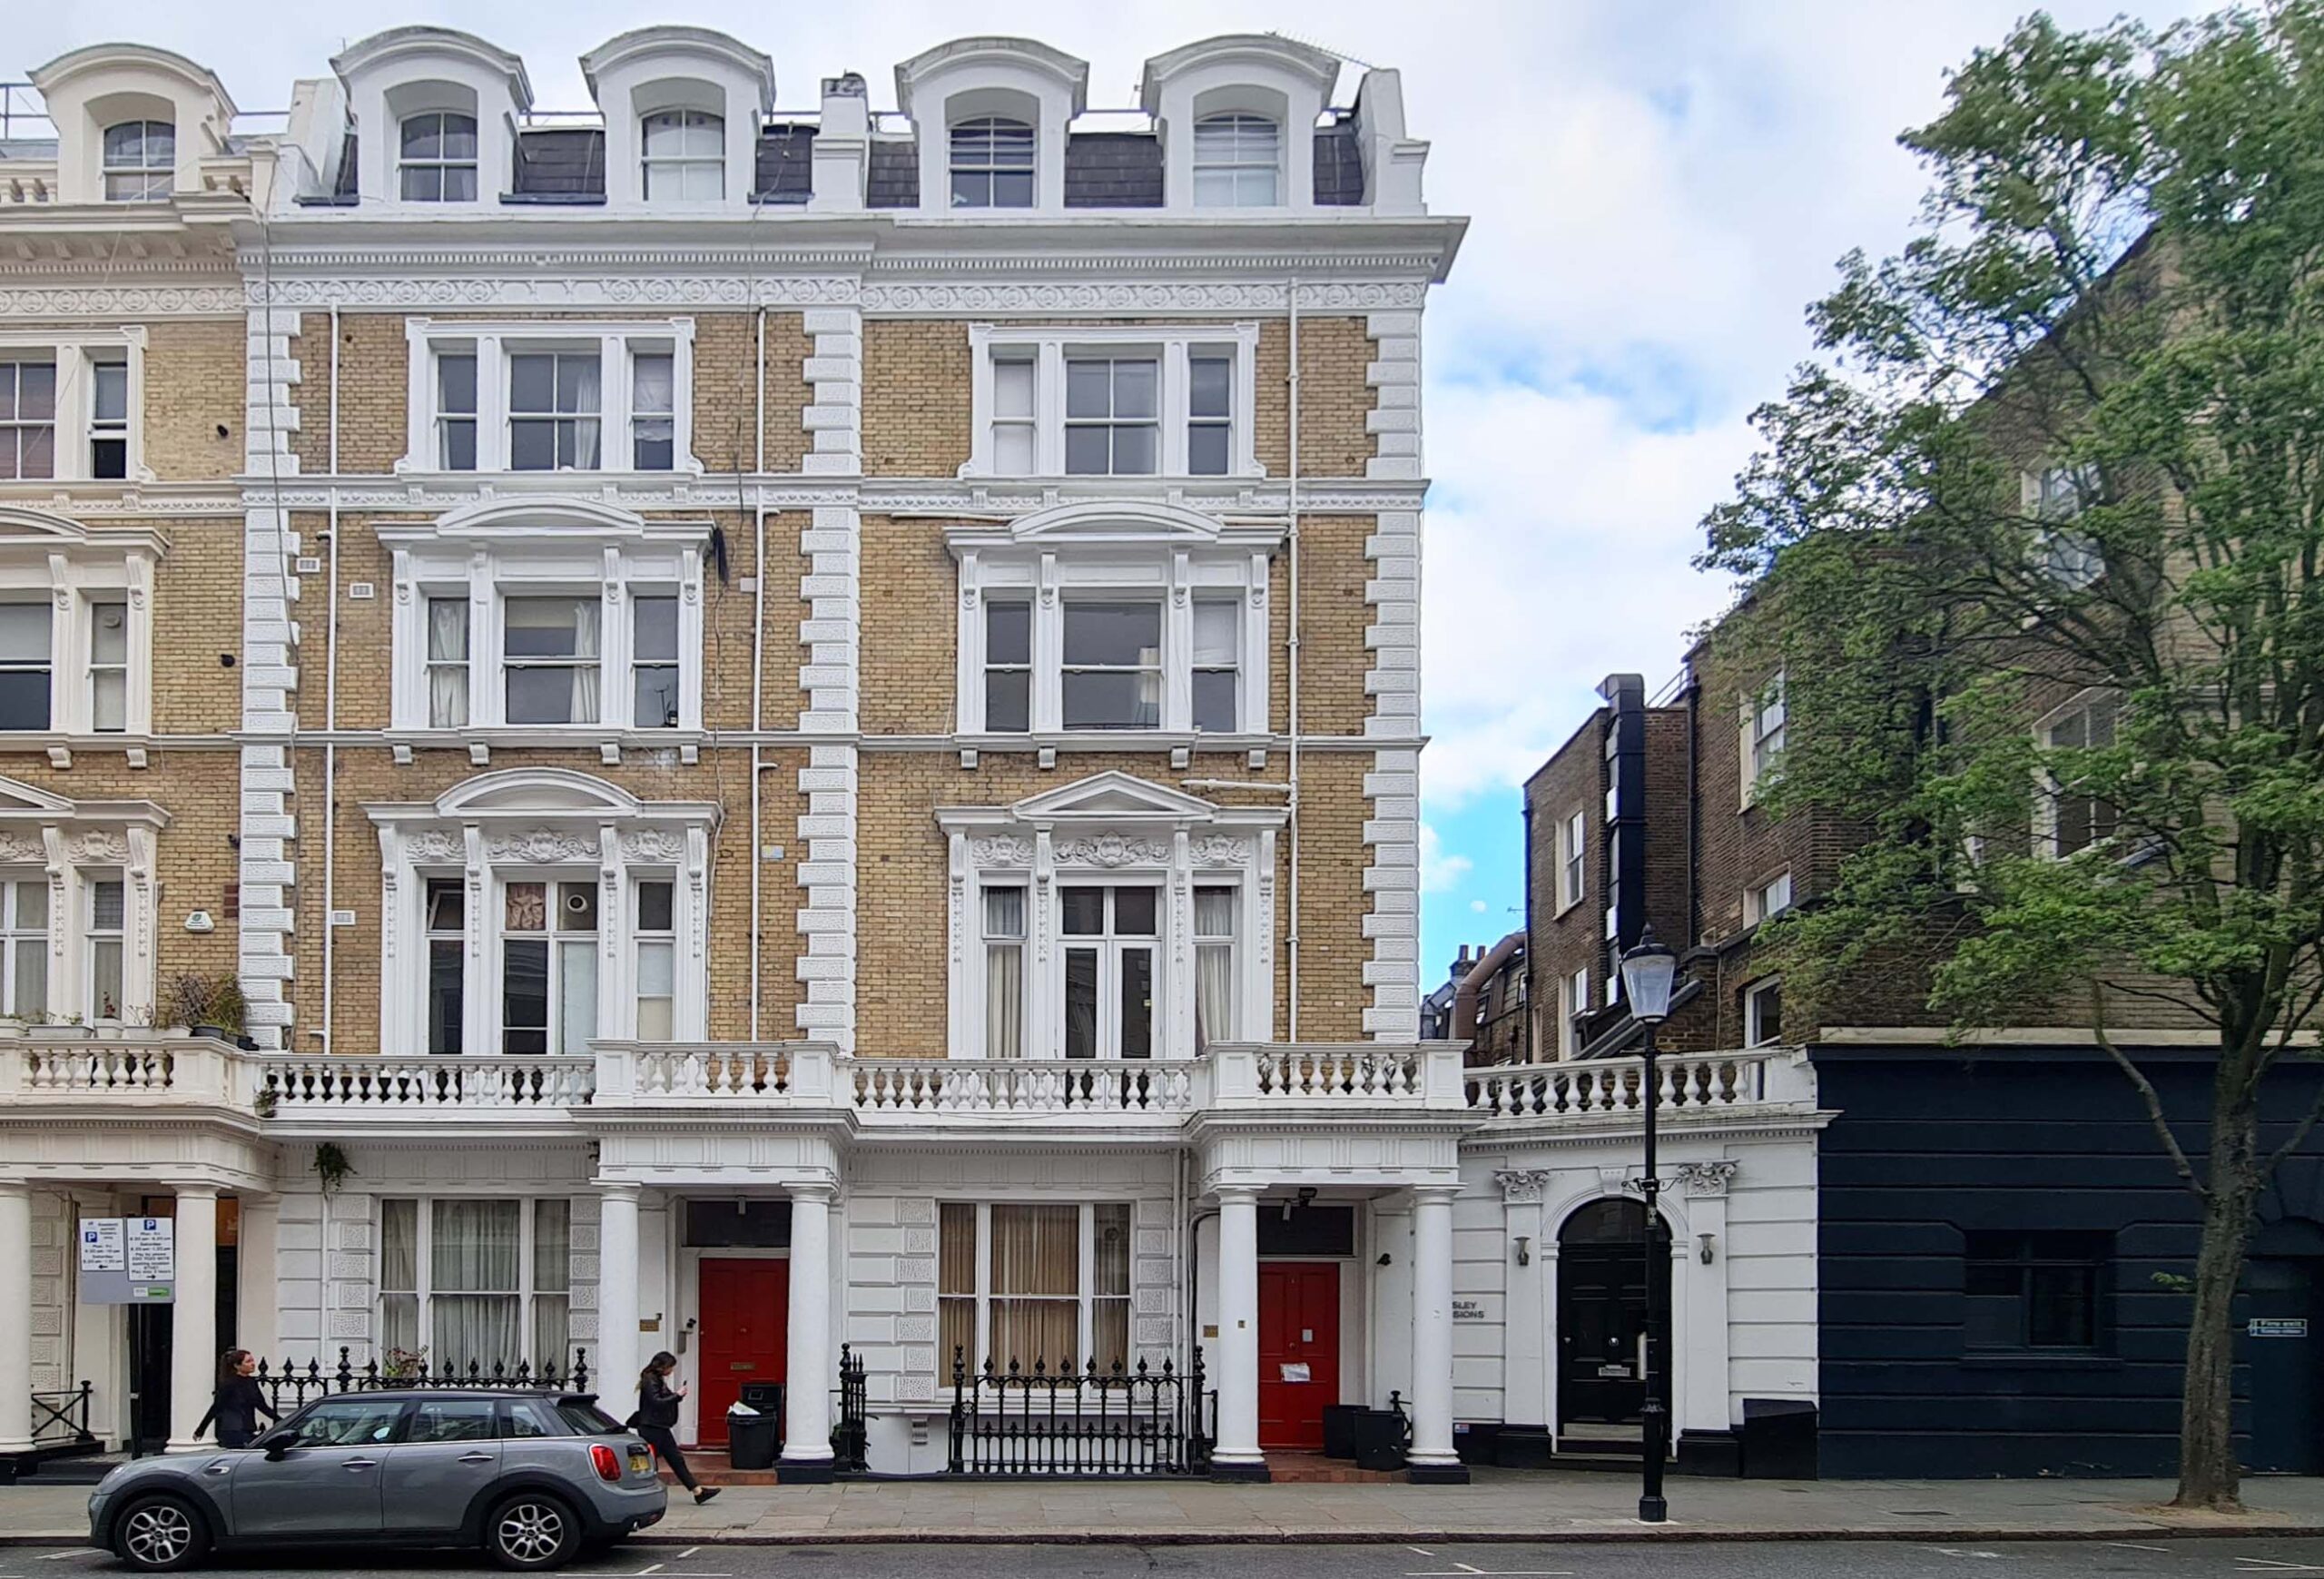 New acquisition of Glenwell Group in Prime Central London